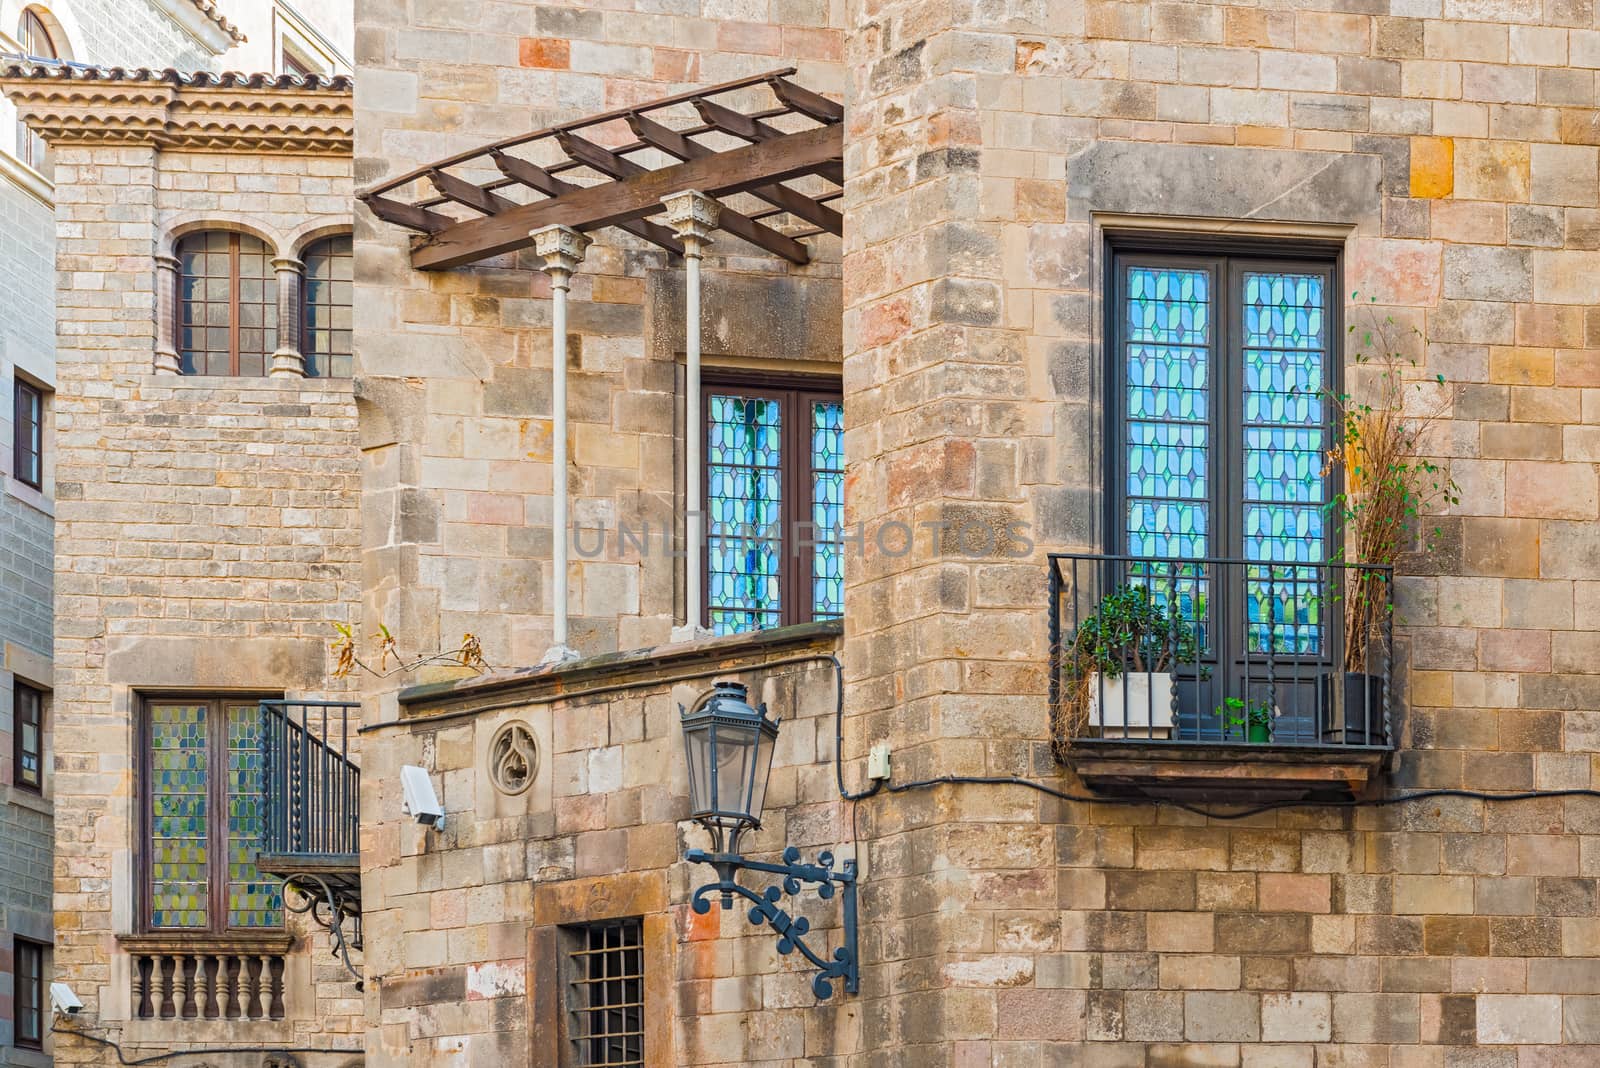 Buildings details in old part of Barcelona called Gothic Quarter.